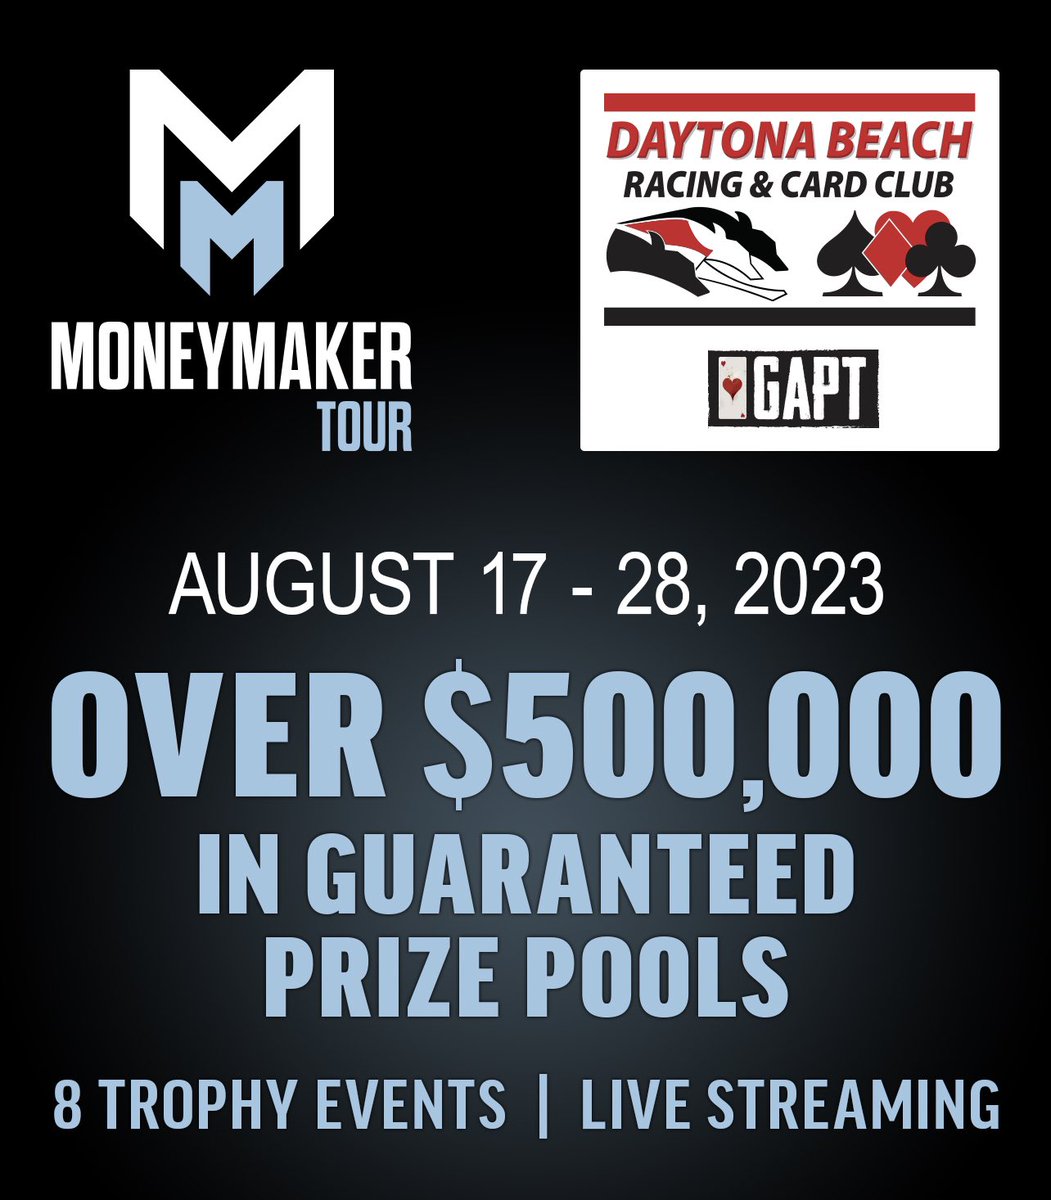 Exactly one month from today, the Moneymaker Tour makes its next stop @DBKCandPR! Running through August 28th, the series features 8 trophy events and over $500,000 in guarantees! Check out the full schedule and structures here: https://t.co/Ic3MLDIwce https://t.co/XopqtbiVdE